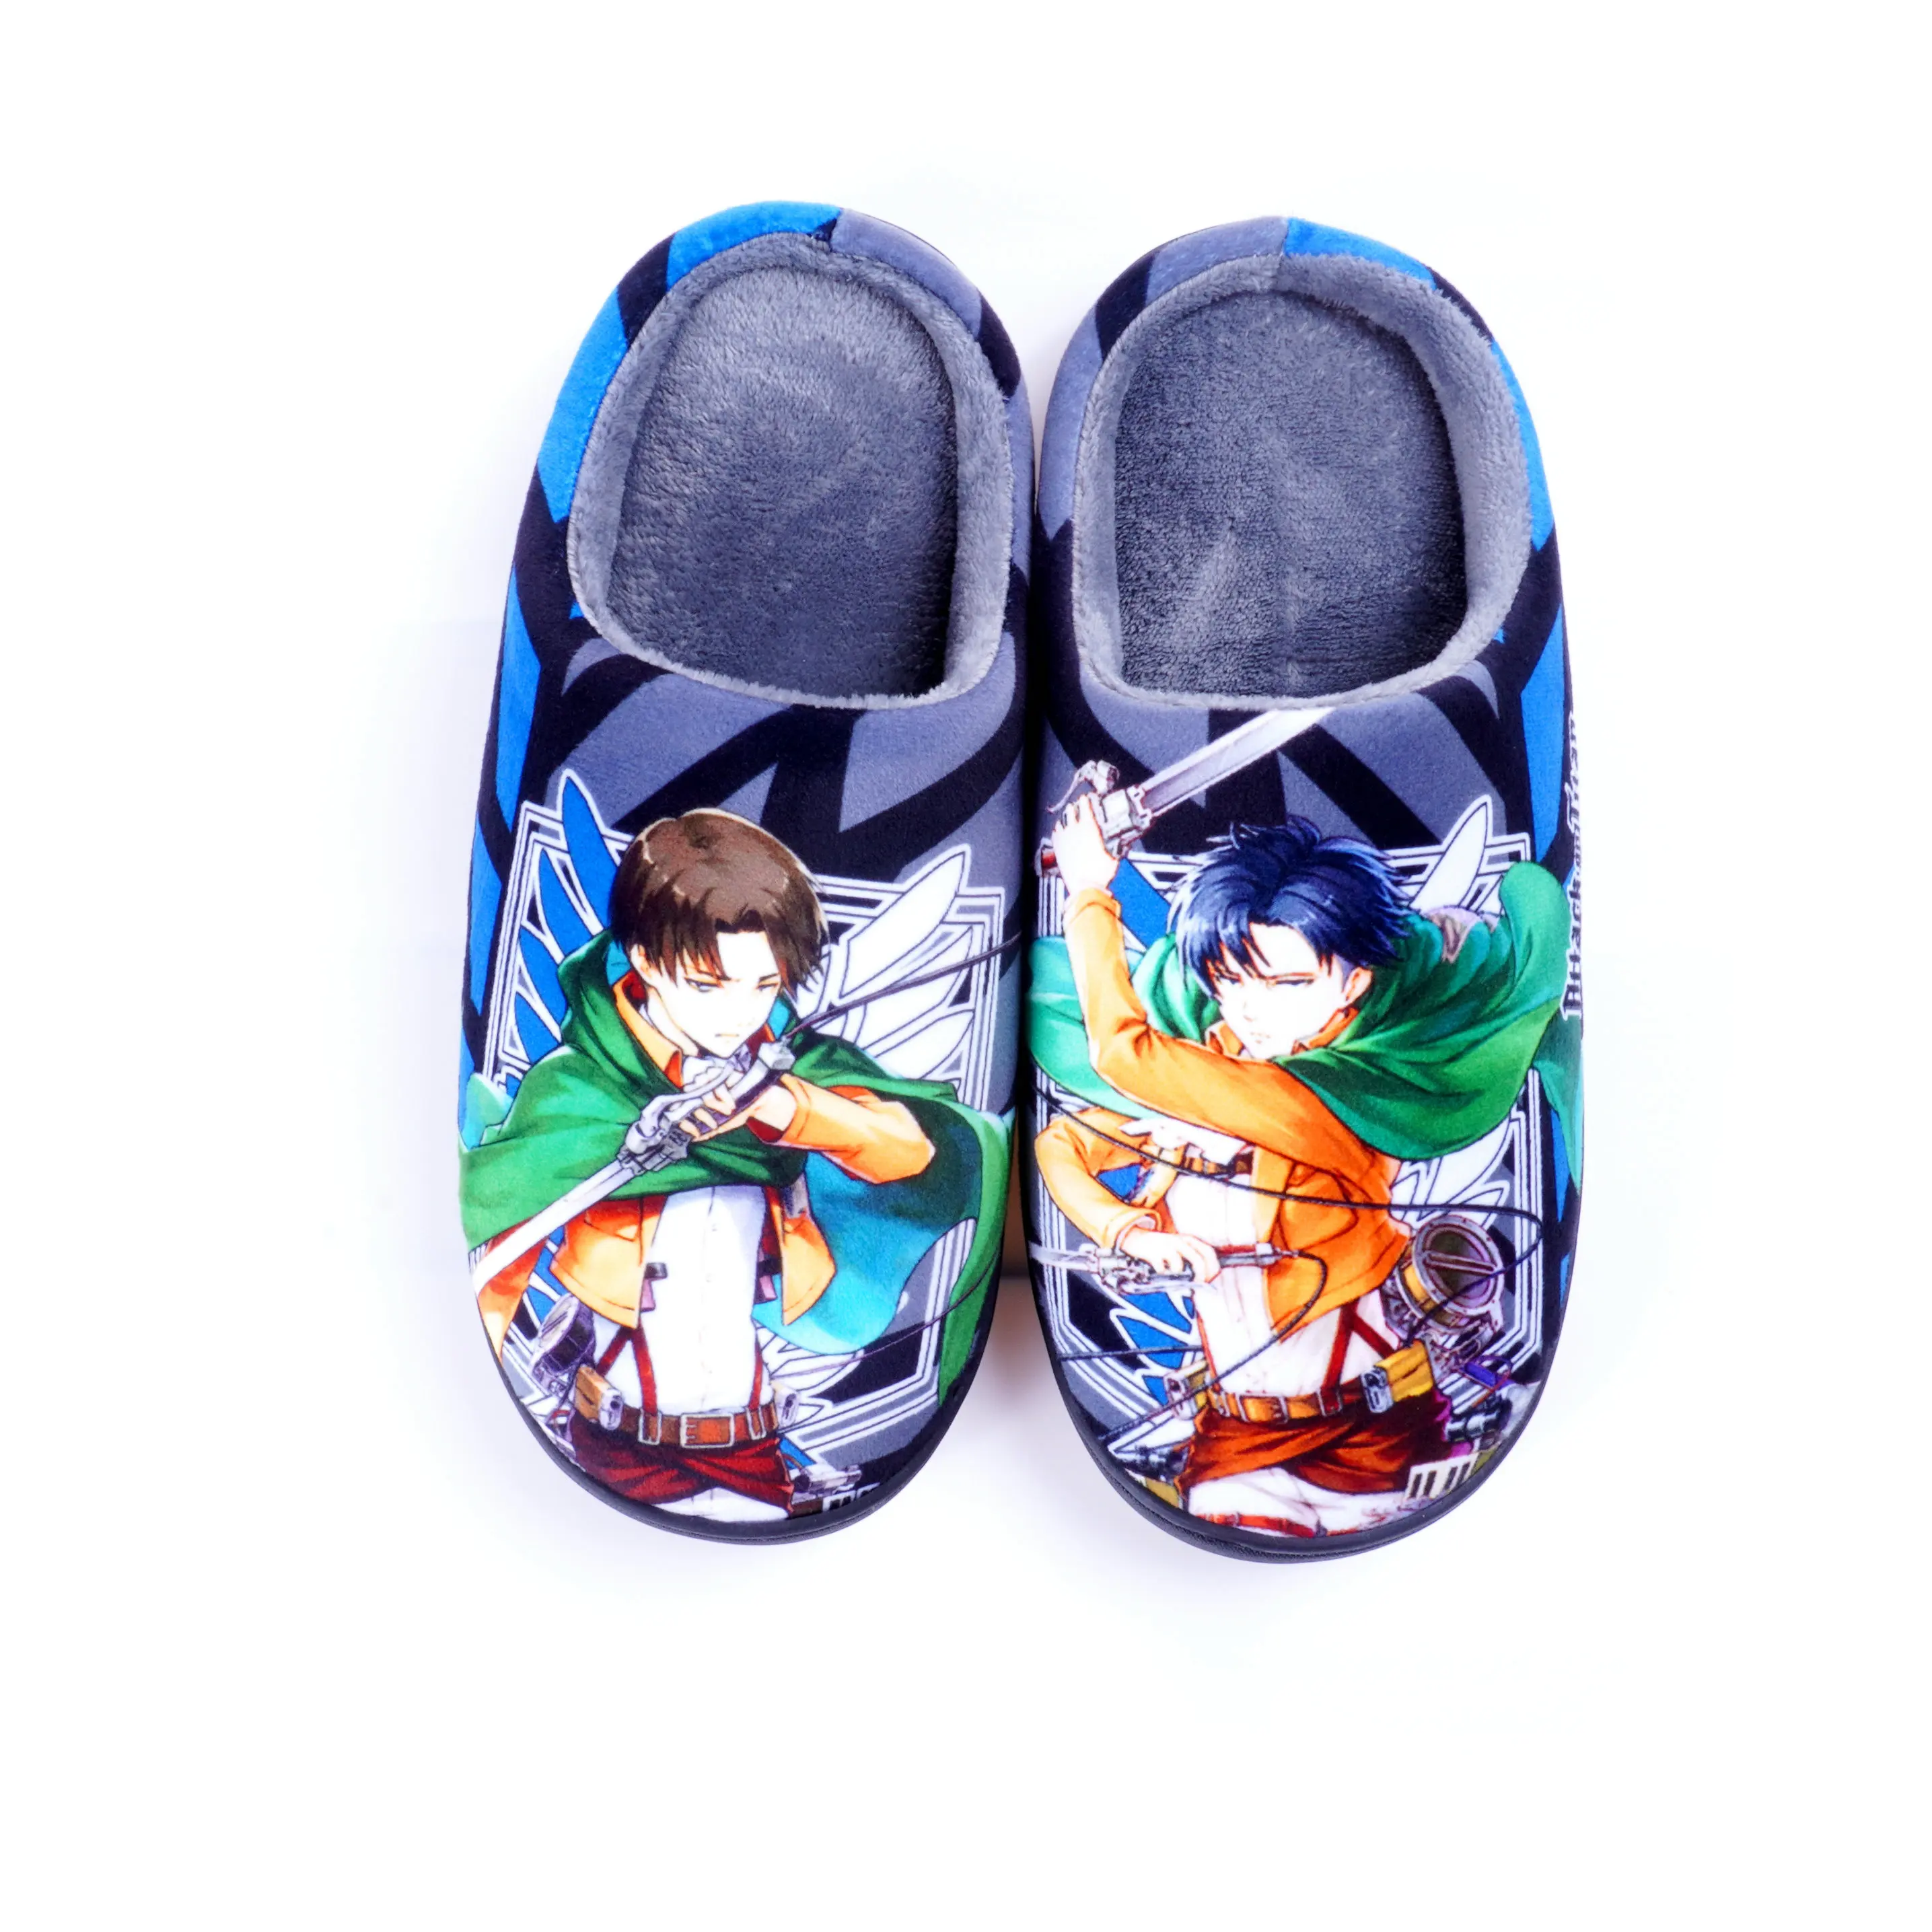 Anime Winter Home Slippers DS SAO AT Men Women Slippers Japanese Cartoon Slipper 11 - Anime Slippers Store